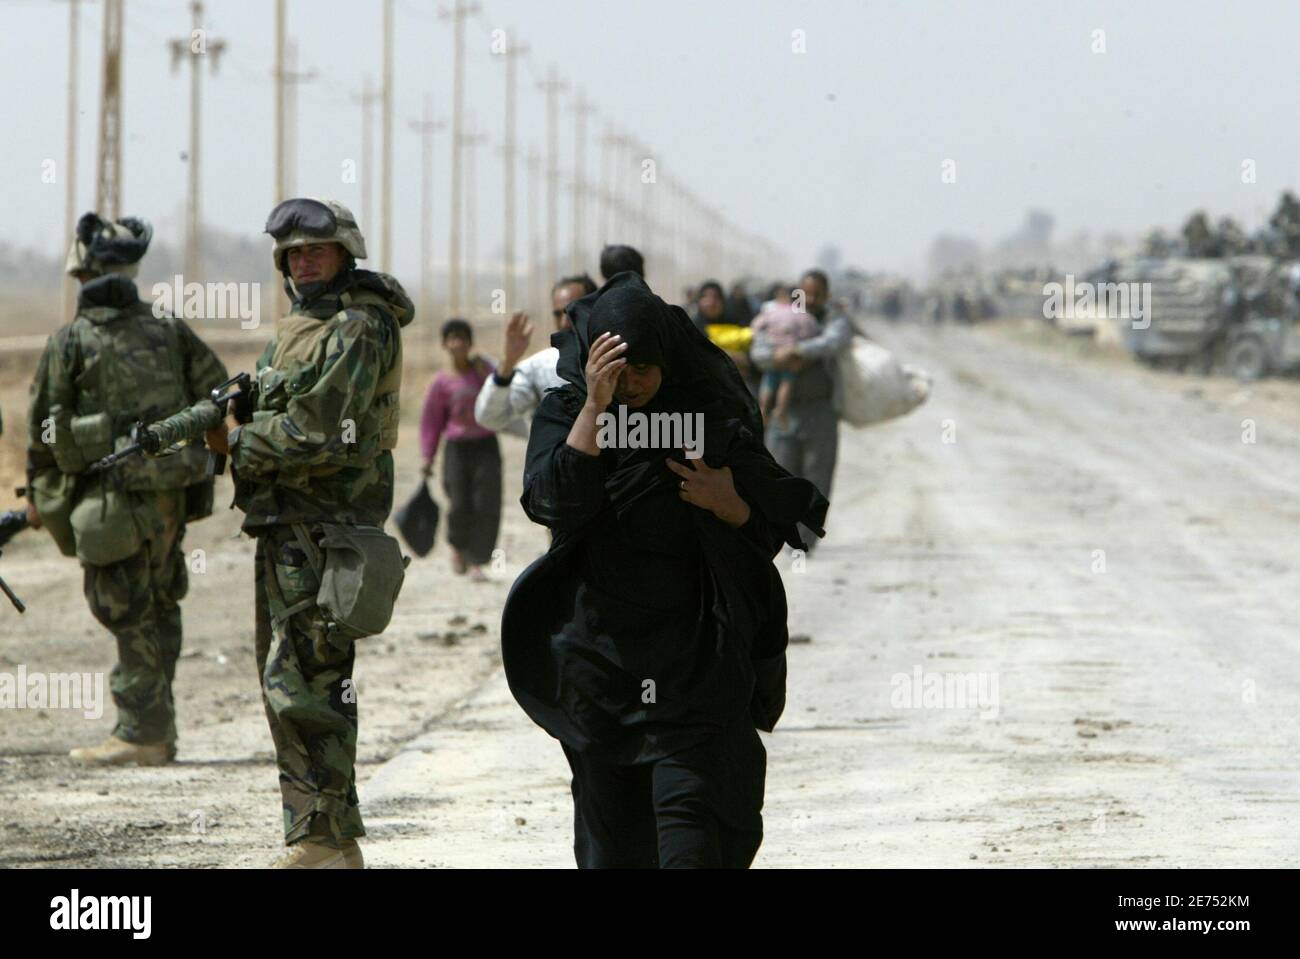 An Iraqi woman, a refugee from Baghdad, walks next to a U.S. Marine from Lima Company, a part of the 7th Marine Regiment, on the road south-east of the Iraqi capital April 5, 2003. U.S. Marine commander said on Saturday American troops would use overwhelming force to crush any resistance if ordered to storm Baghdad and that the battle would cost many civilian lives.   REUTERS/Oleg Popov   (IRAQ) Foto de stock